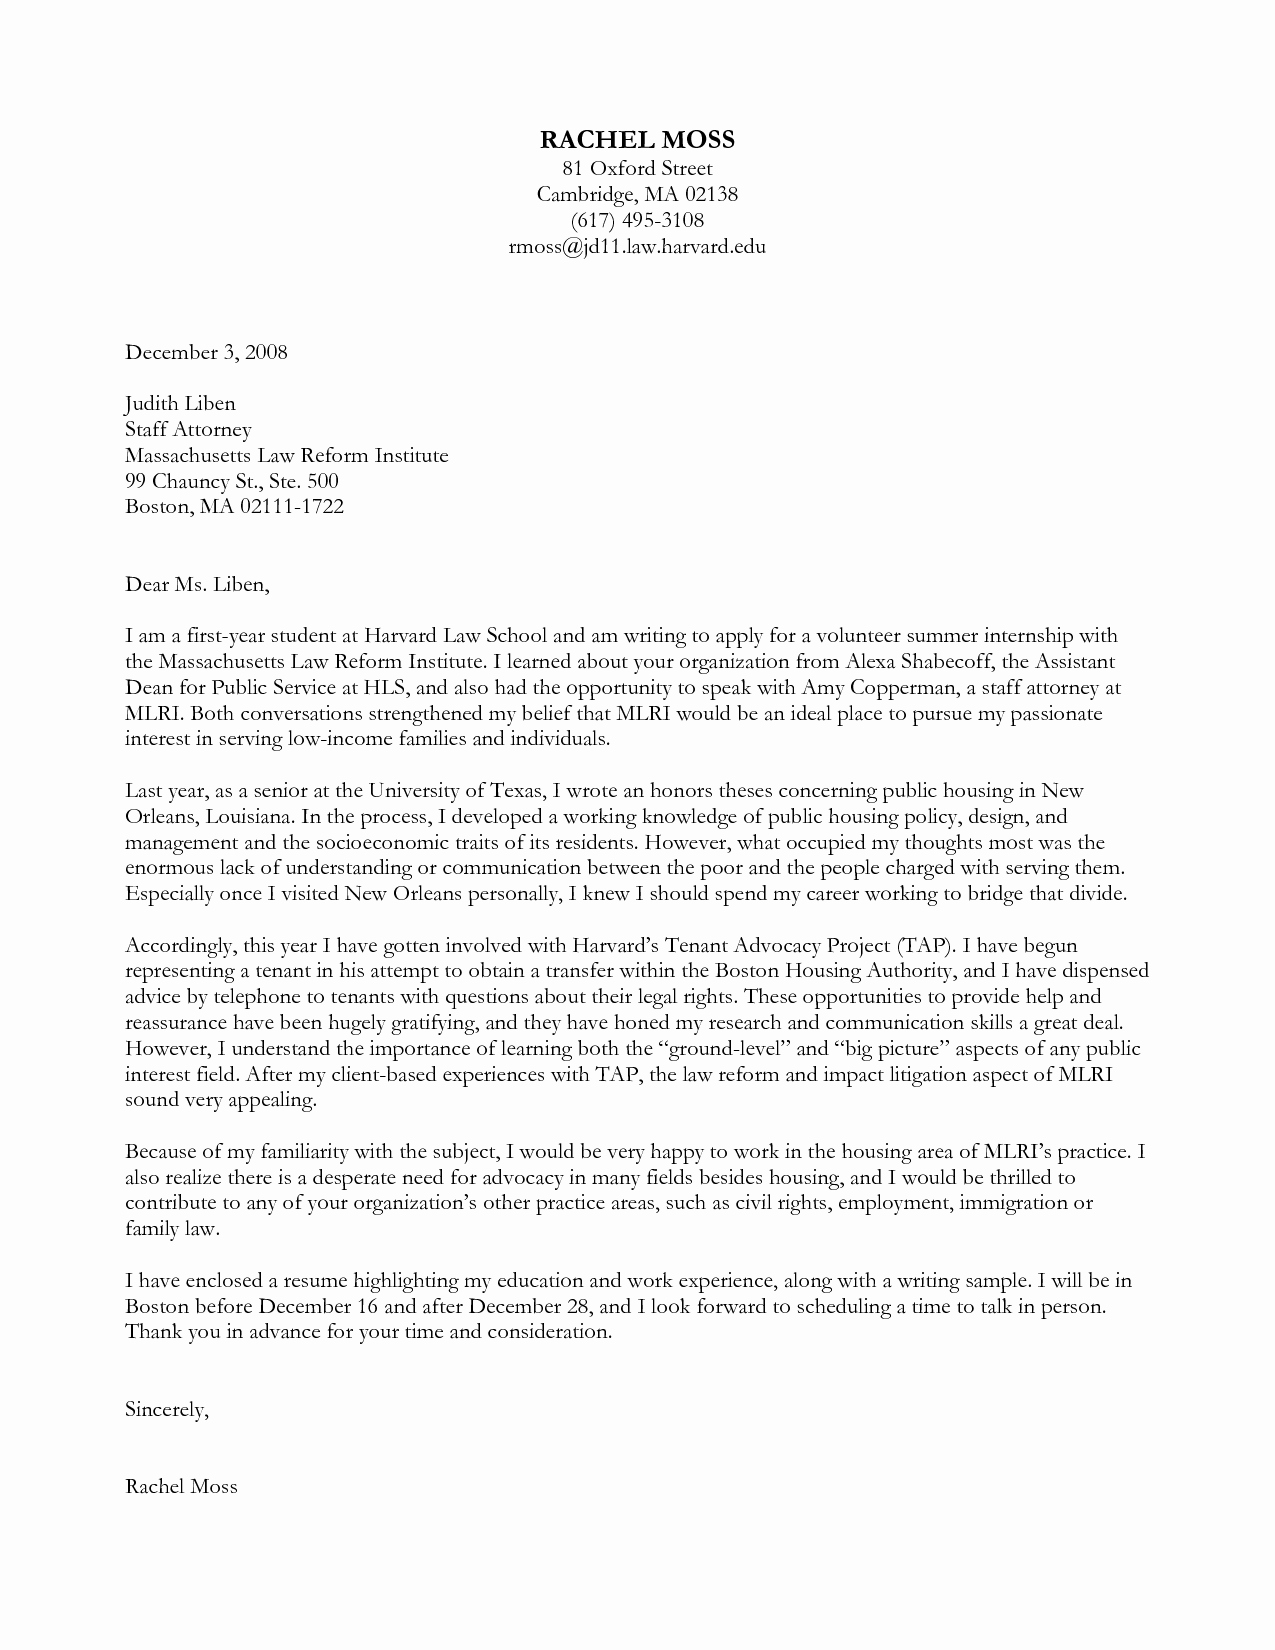 Harvard Letter Of Recommendation Beautiful Harvard Cover Letter